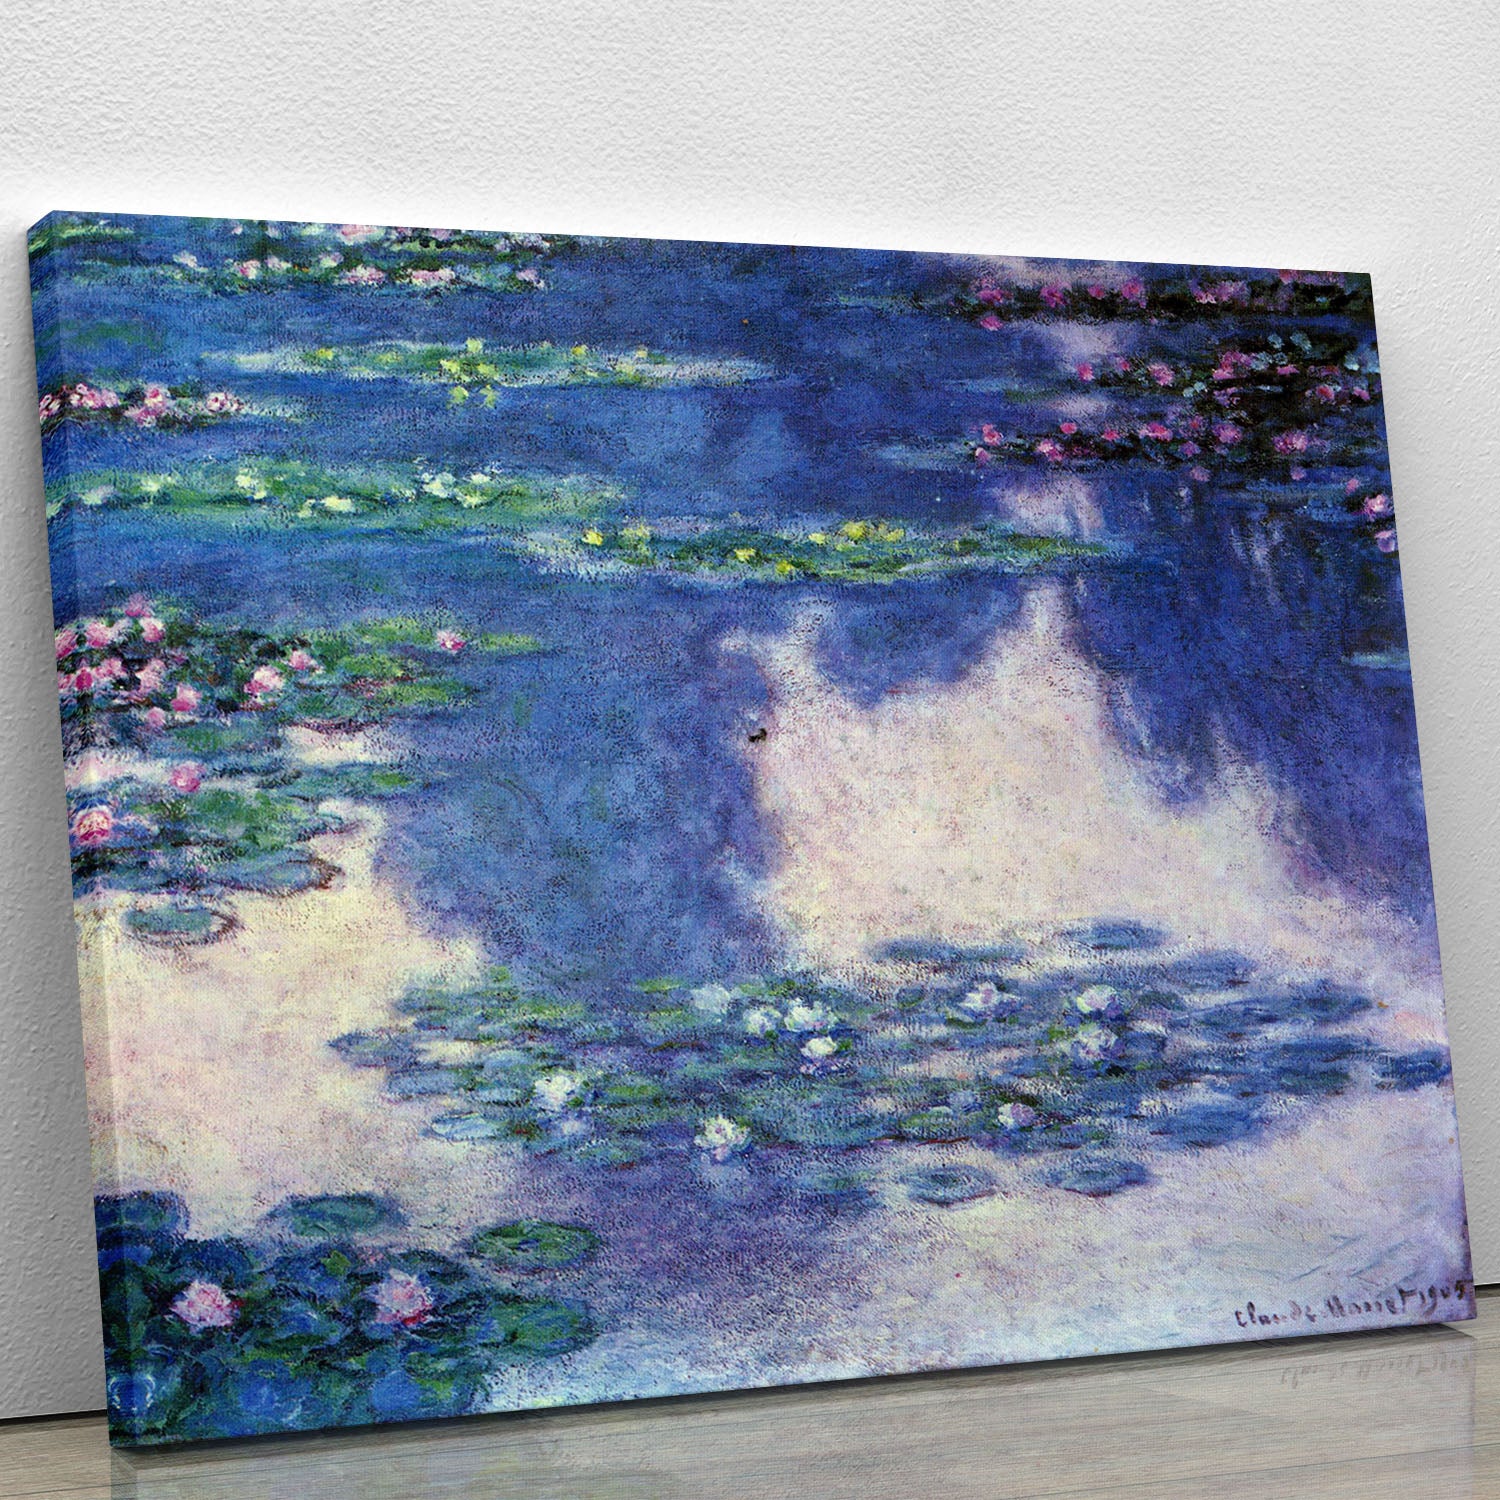 Water lilies water landscape 4 by Monet Canvas Print or Poster - Canvas Art Rocks - 1